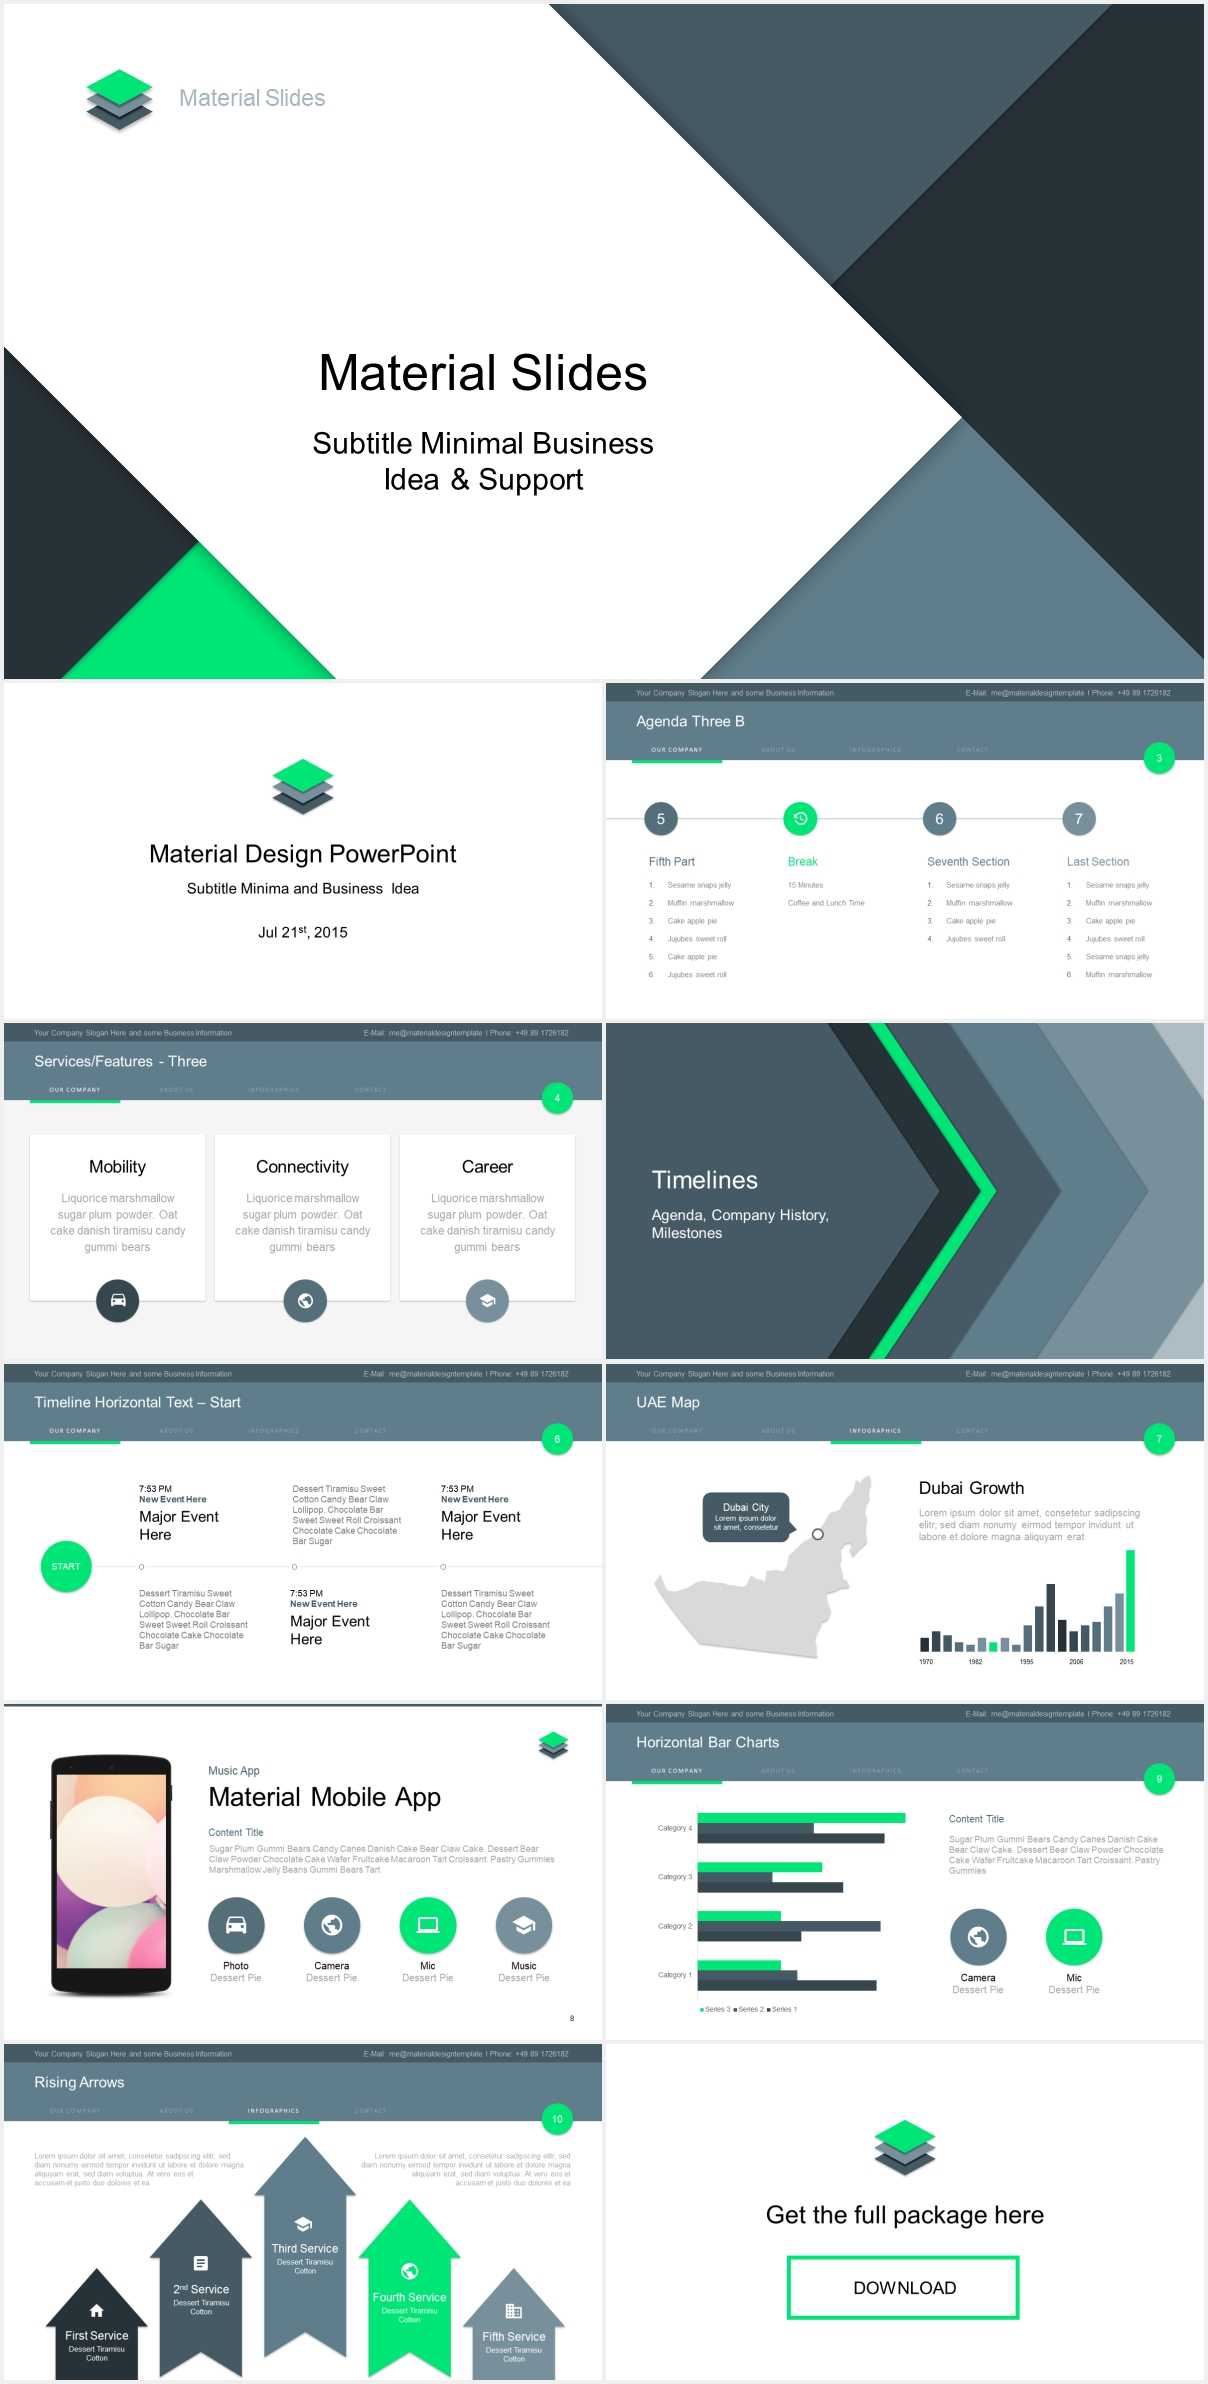 Material Design Powerpoint Template – Milas Inside How To Design A Powerpoint Template